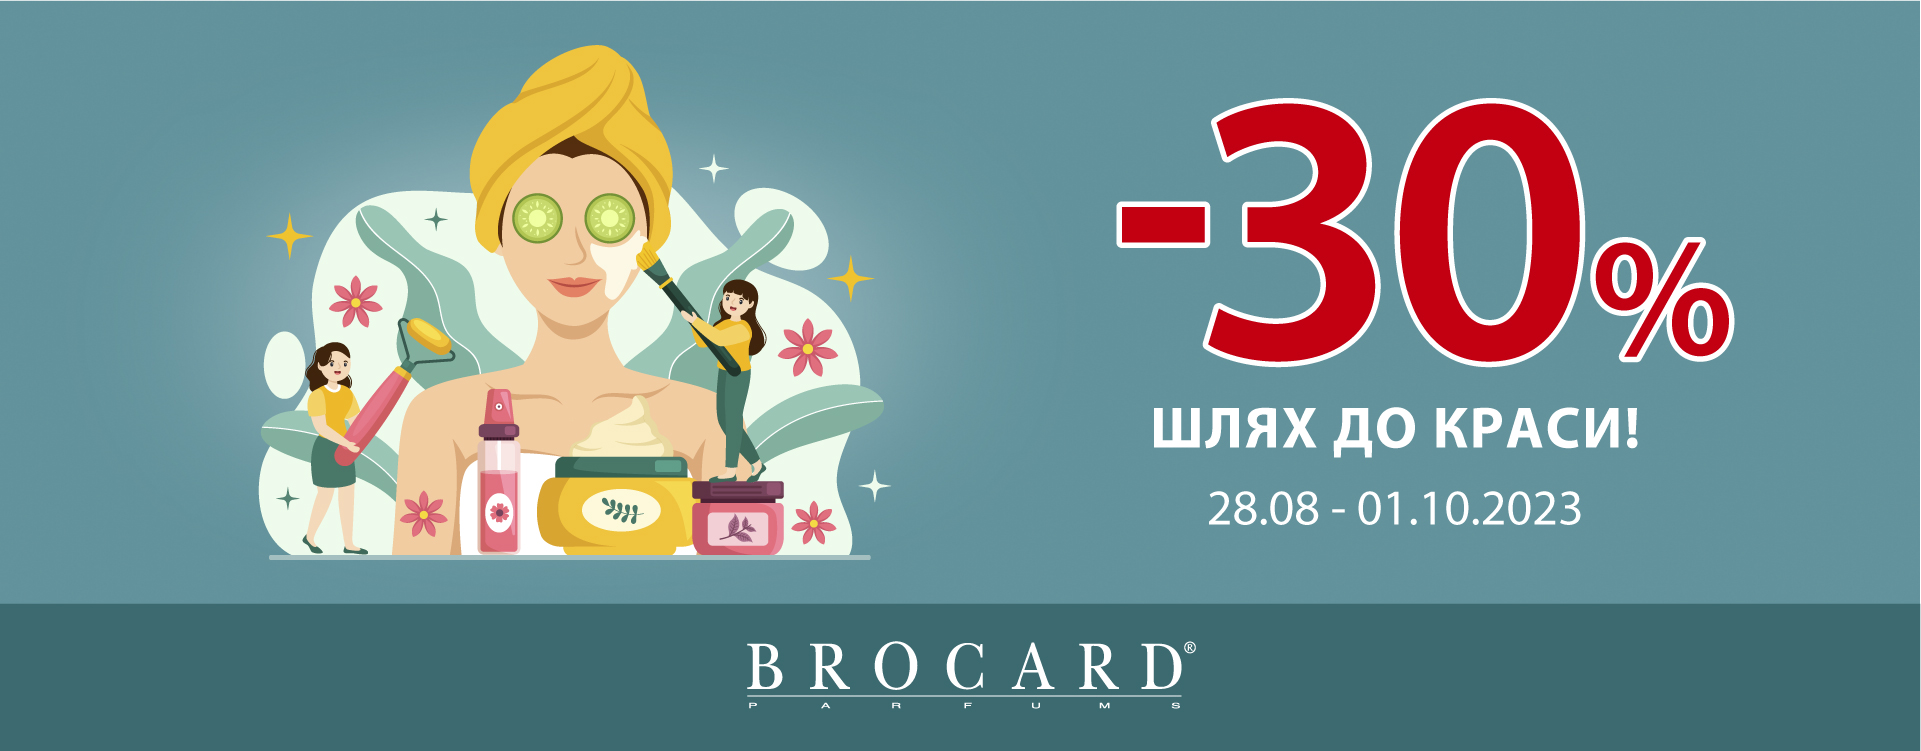 30% discount on care products at BROCARD